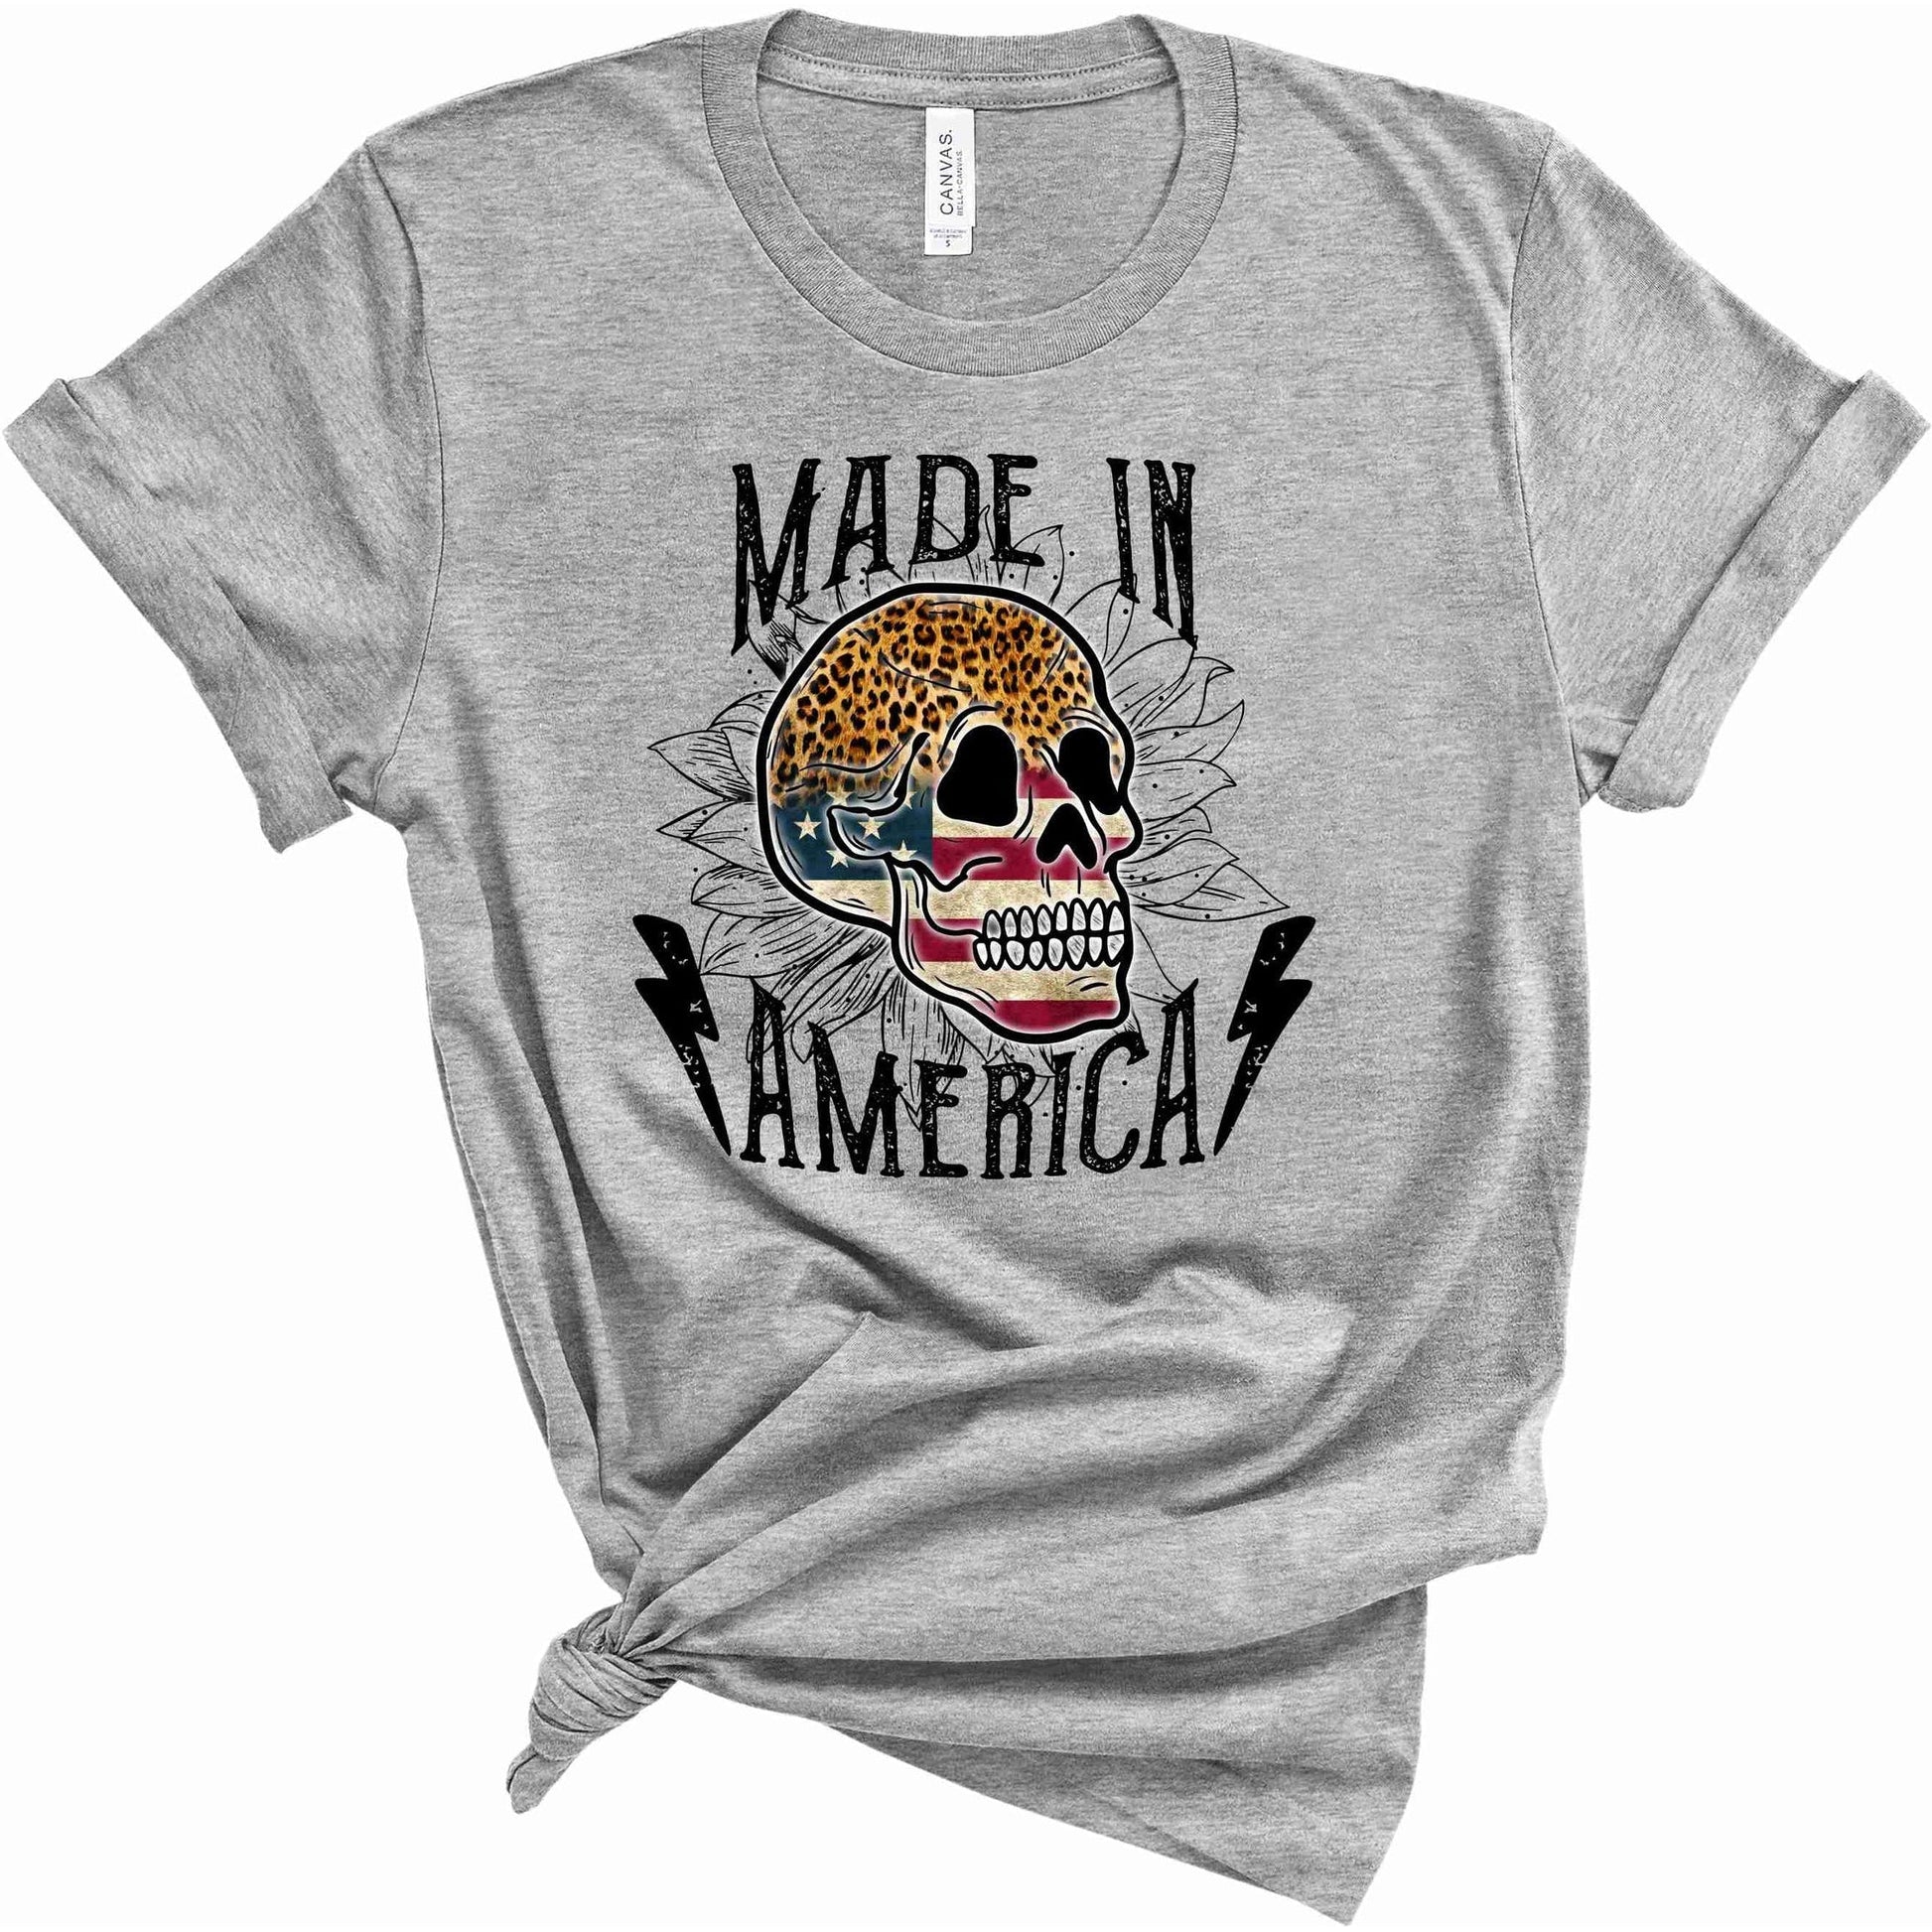 Made In America Leopard- Graphic Tee